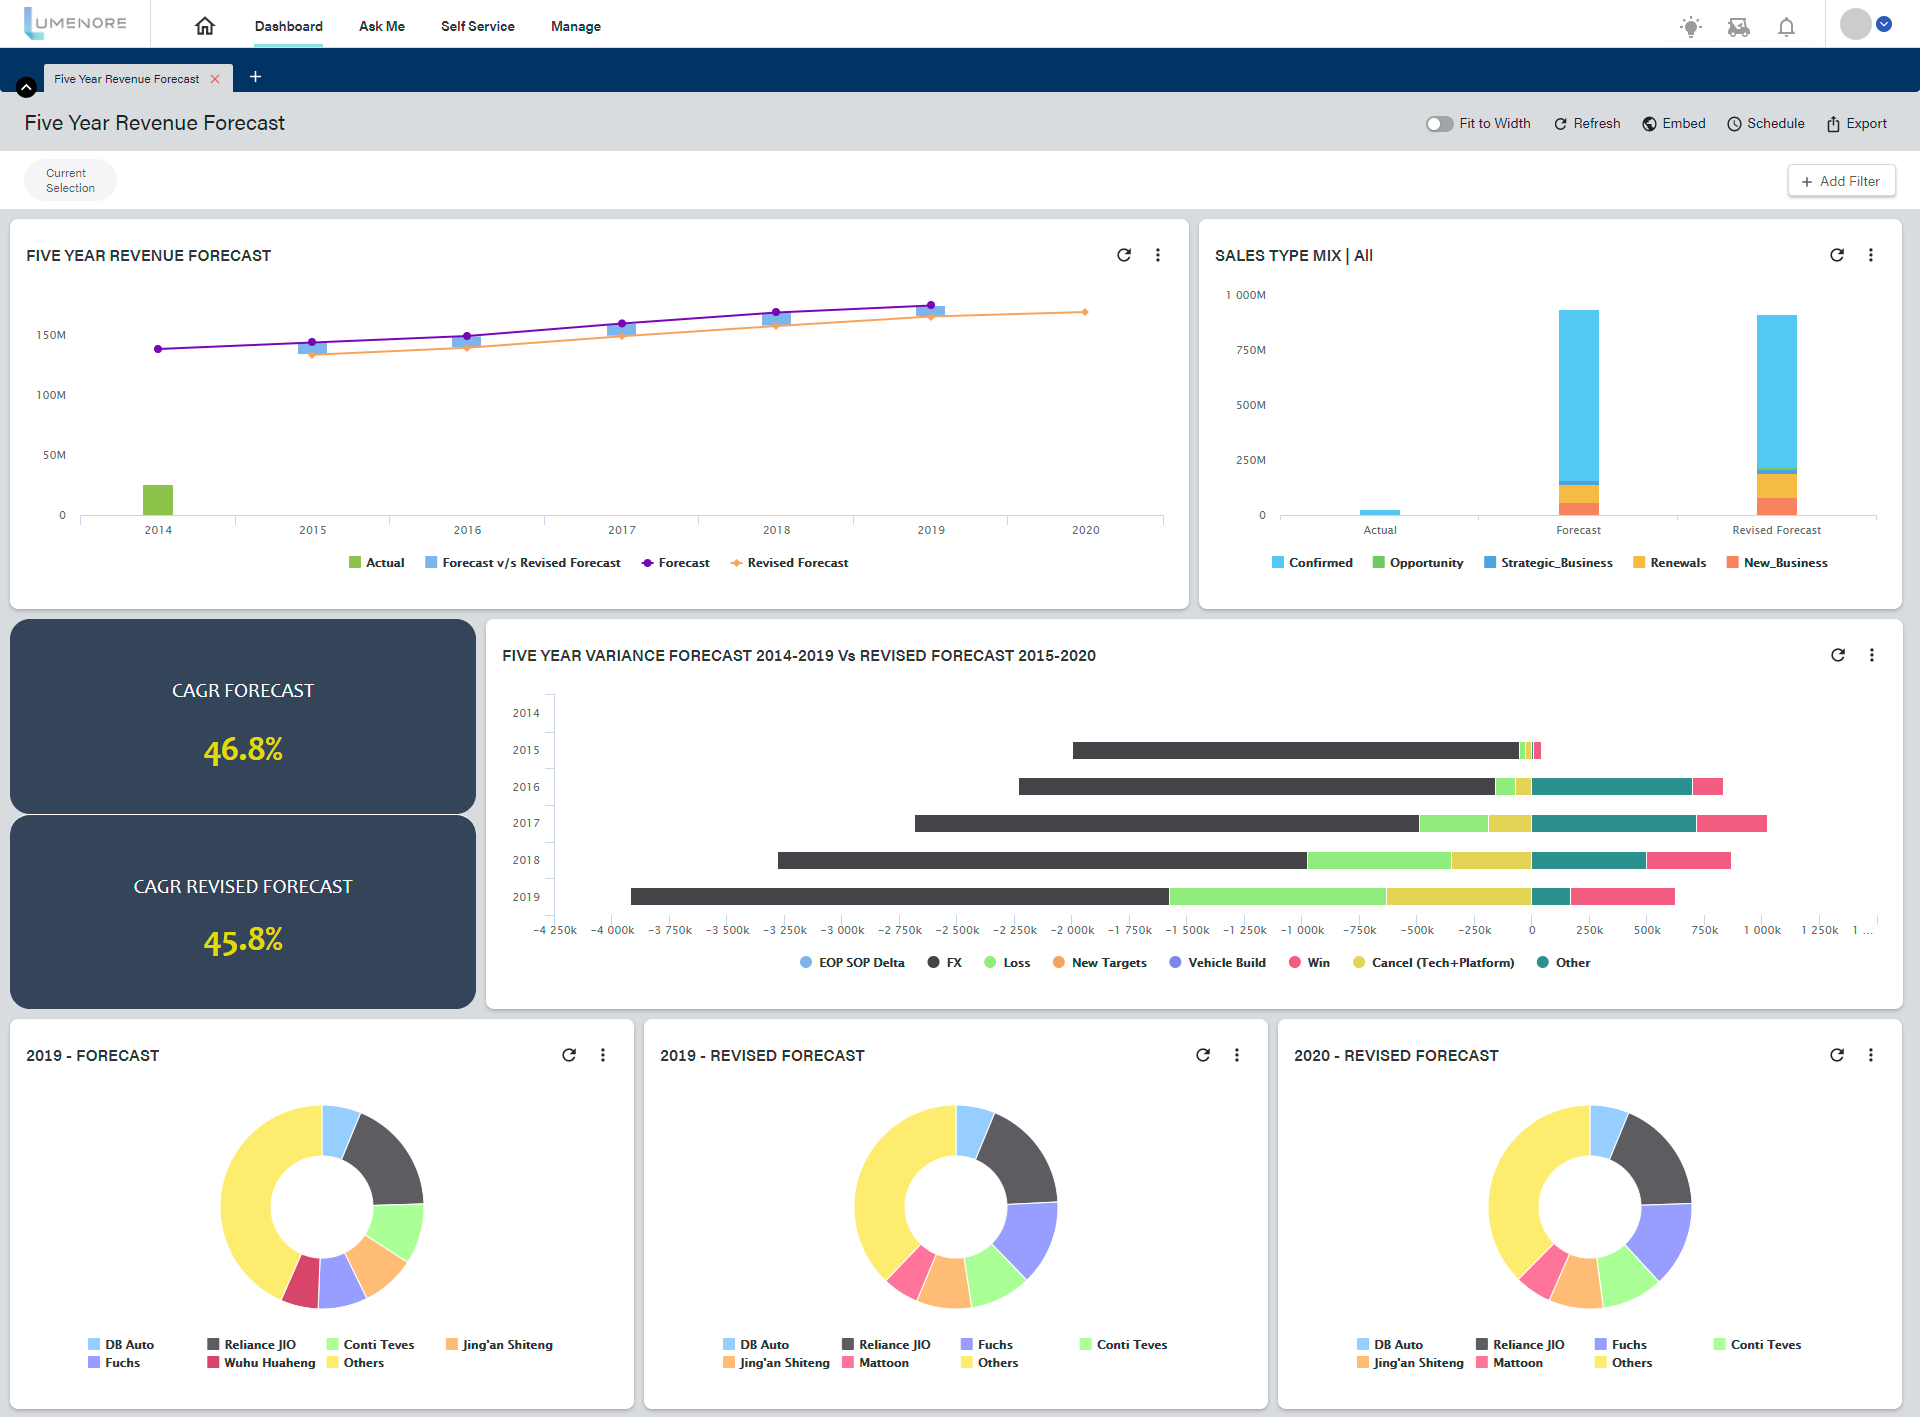 Lumenore Software - Overall dashboard view